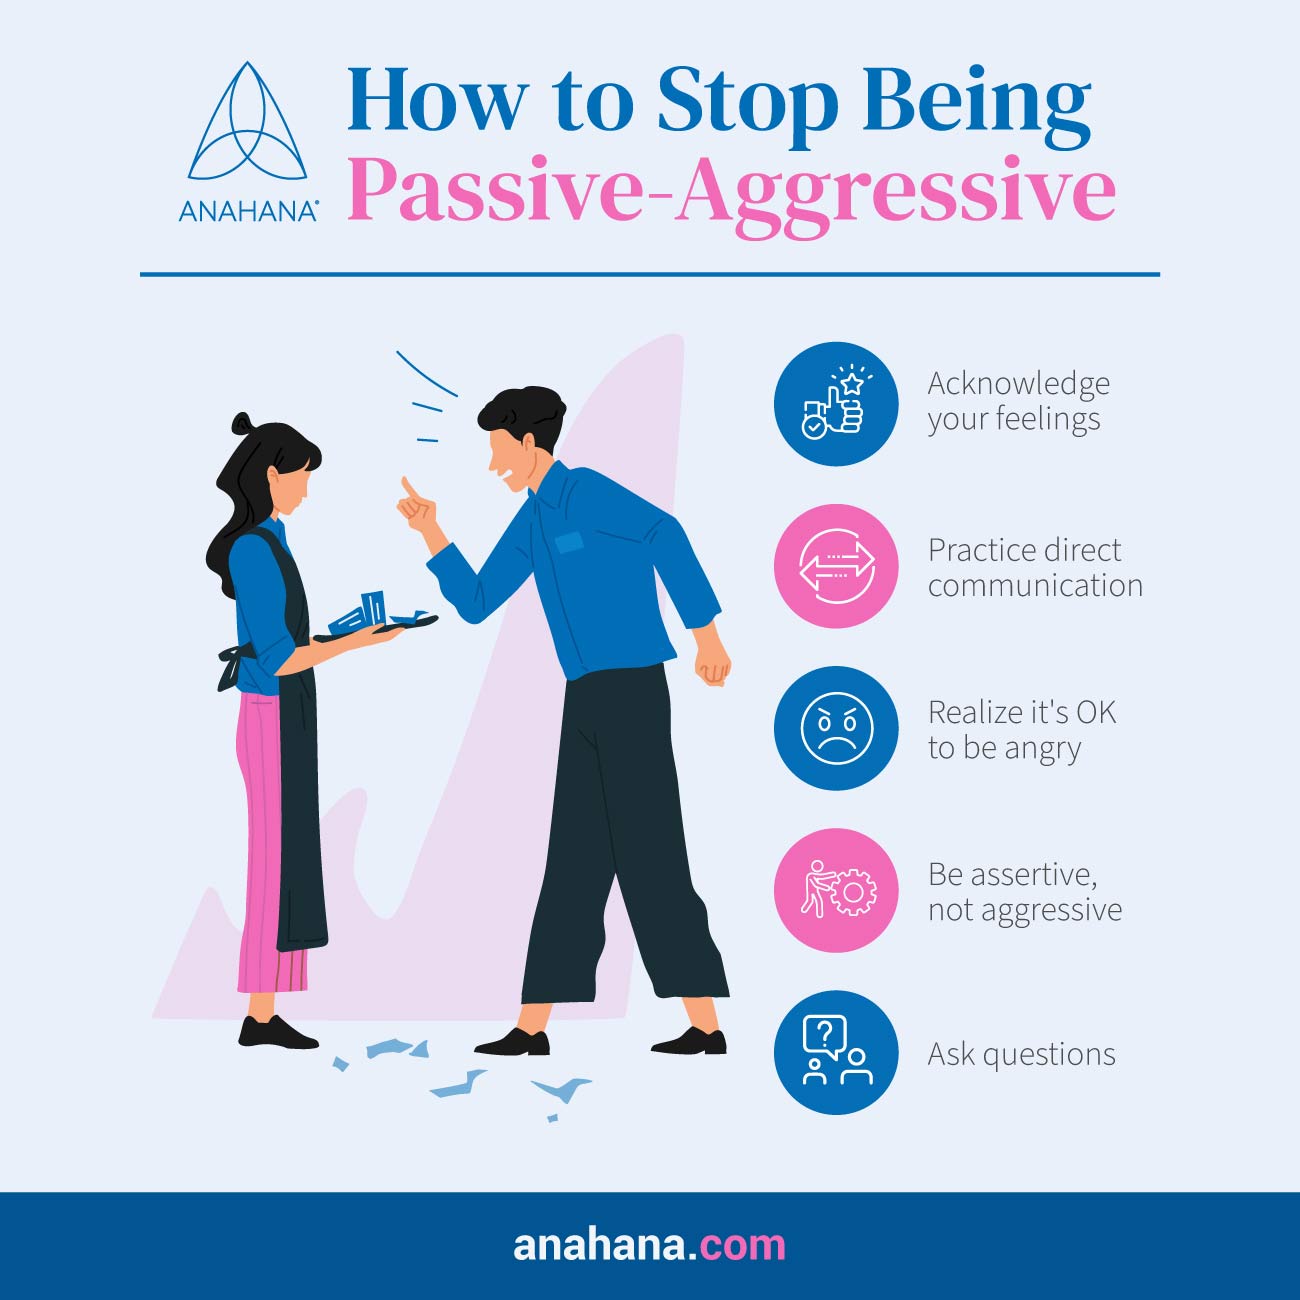 how to stop being passive-aggressive